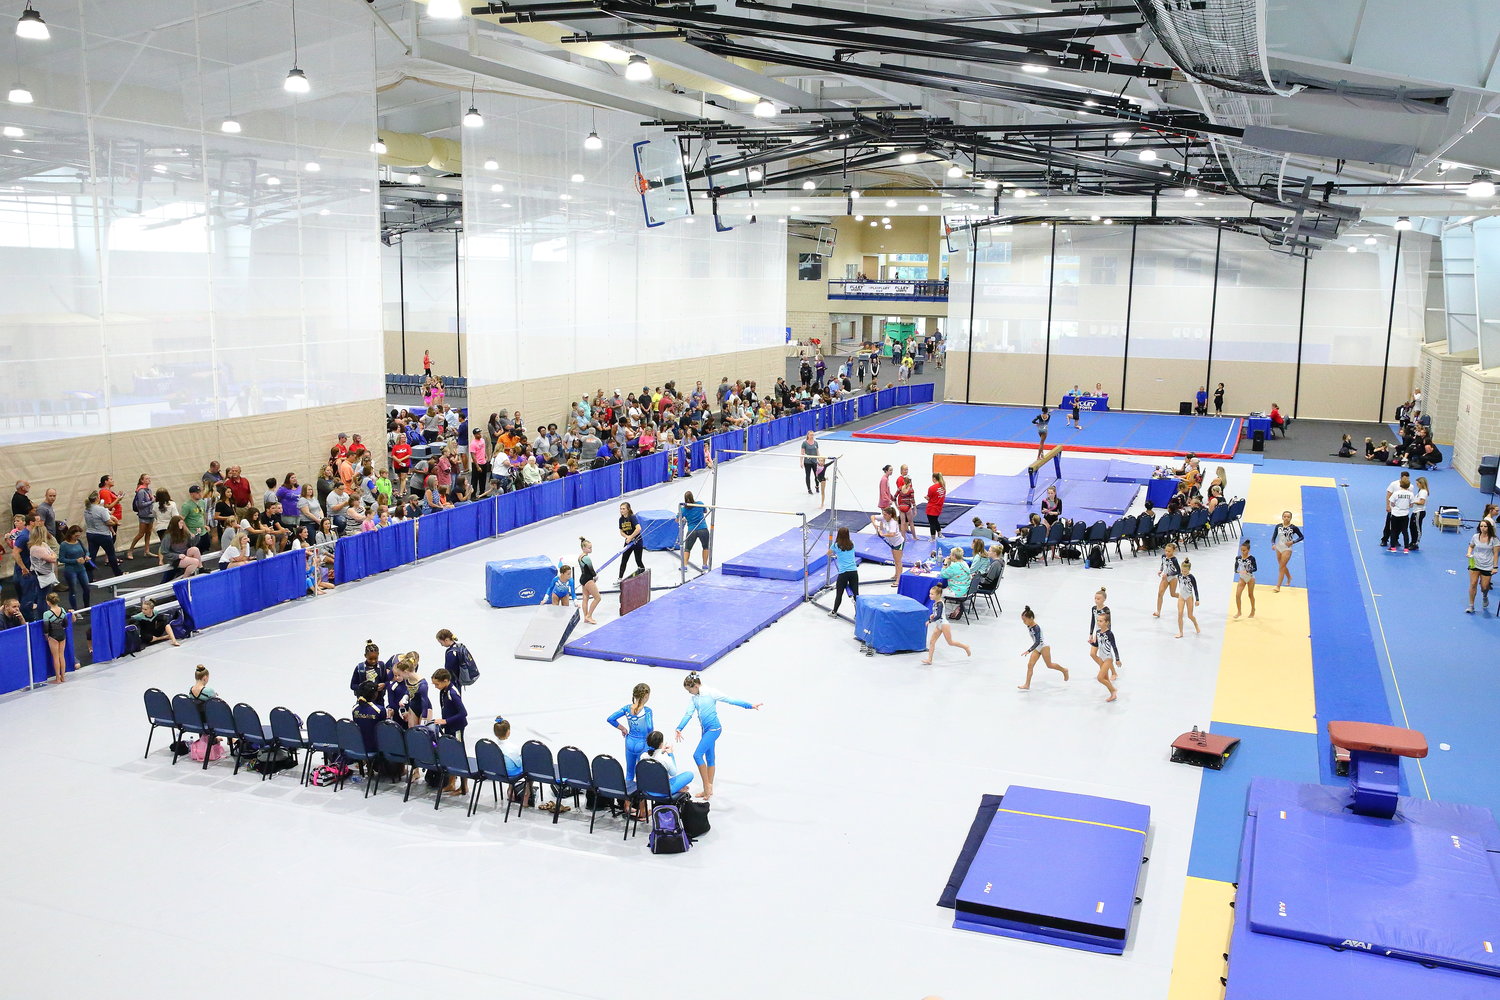 The Foley Event Center hosted over 800 gymnasts from across Alabama in March during the Alabama Optional/Xcel State Championships.